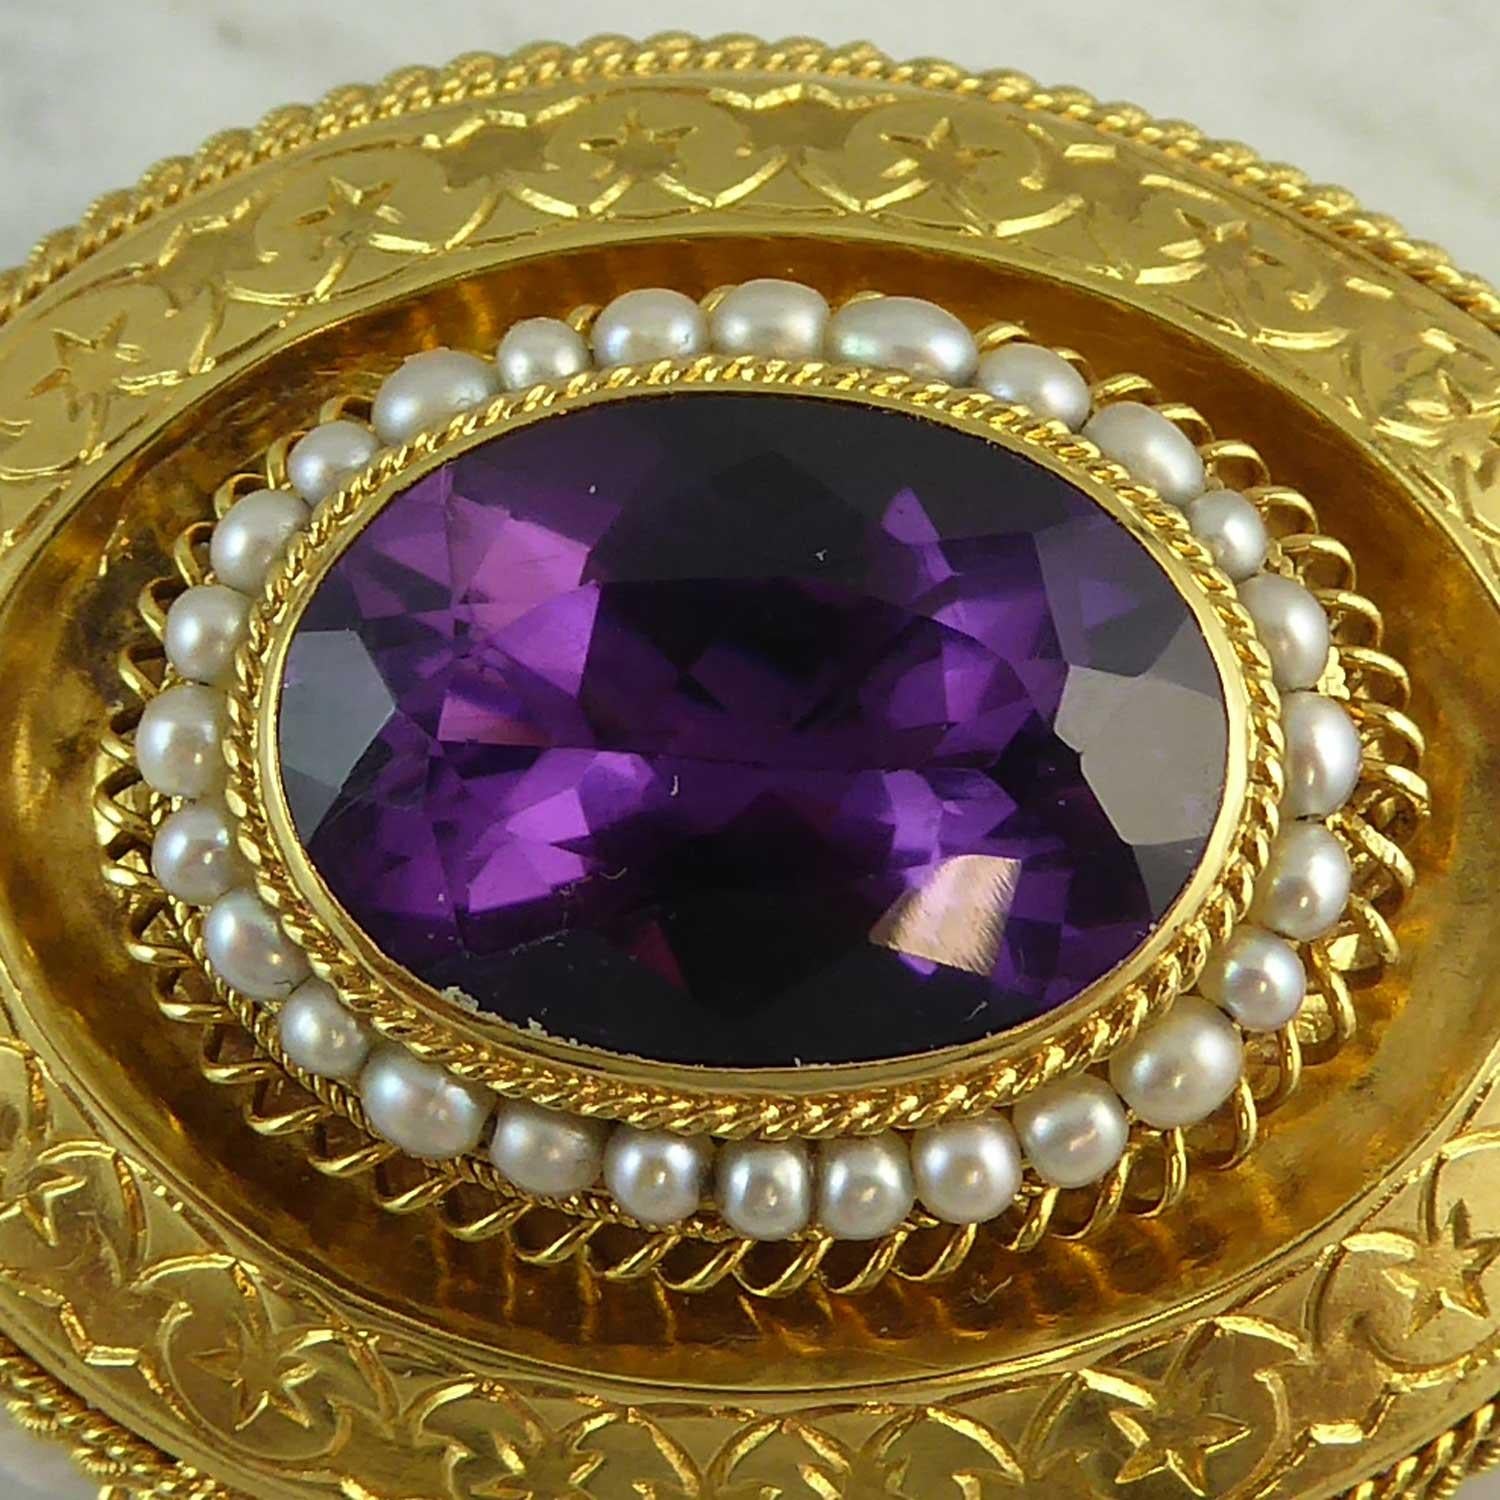 Antique Victorian Amethyst and Pearl Fringed Brooch, circa 1860s, 18 Carat Gold 6